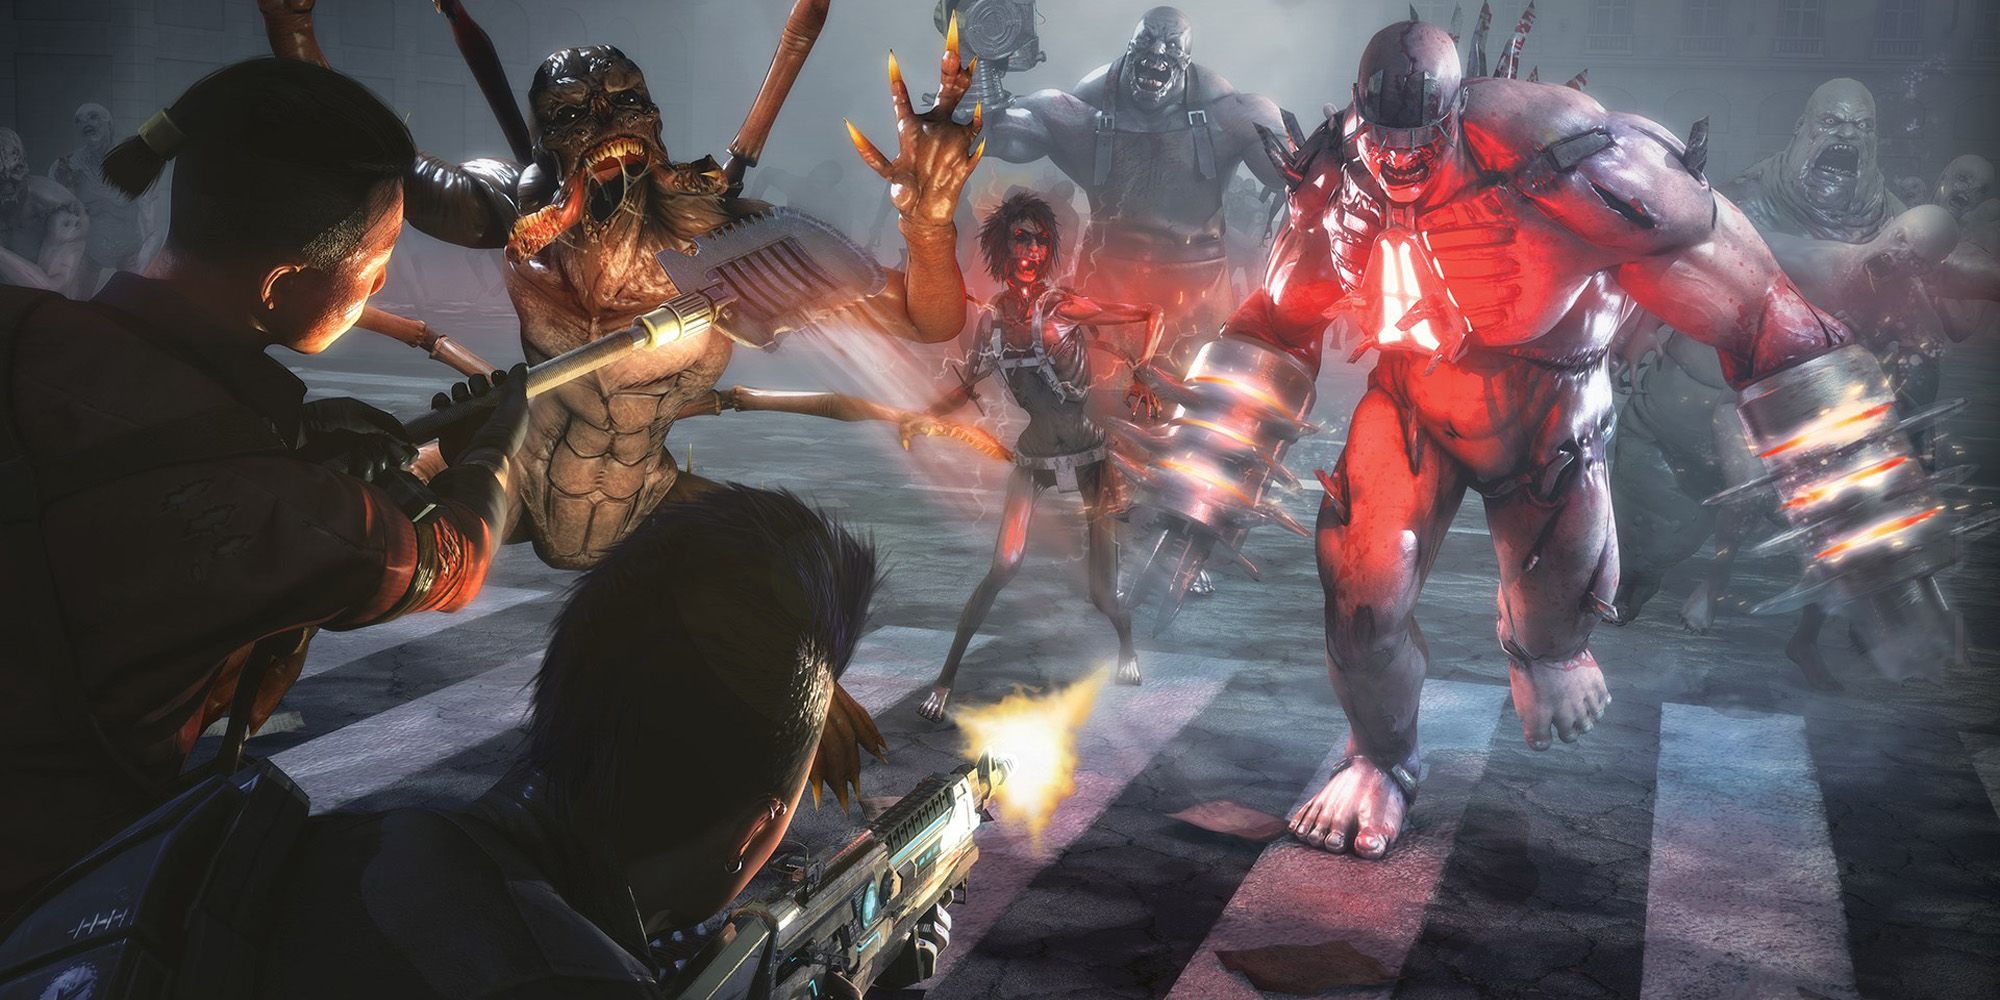 Killing Floor 2 Feature Image huge enemies in the game charging a line of players